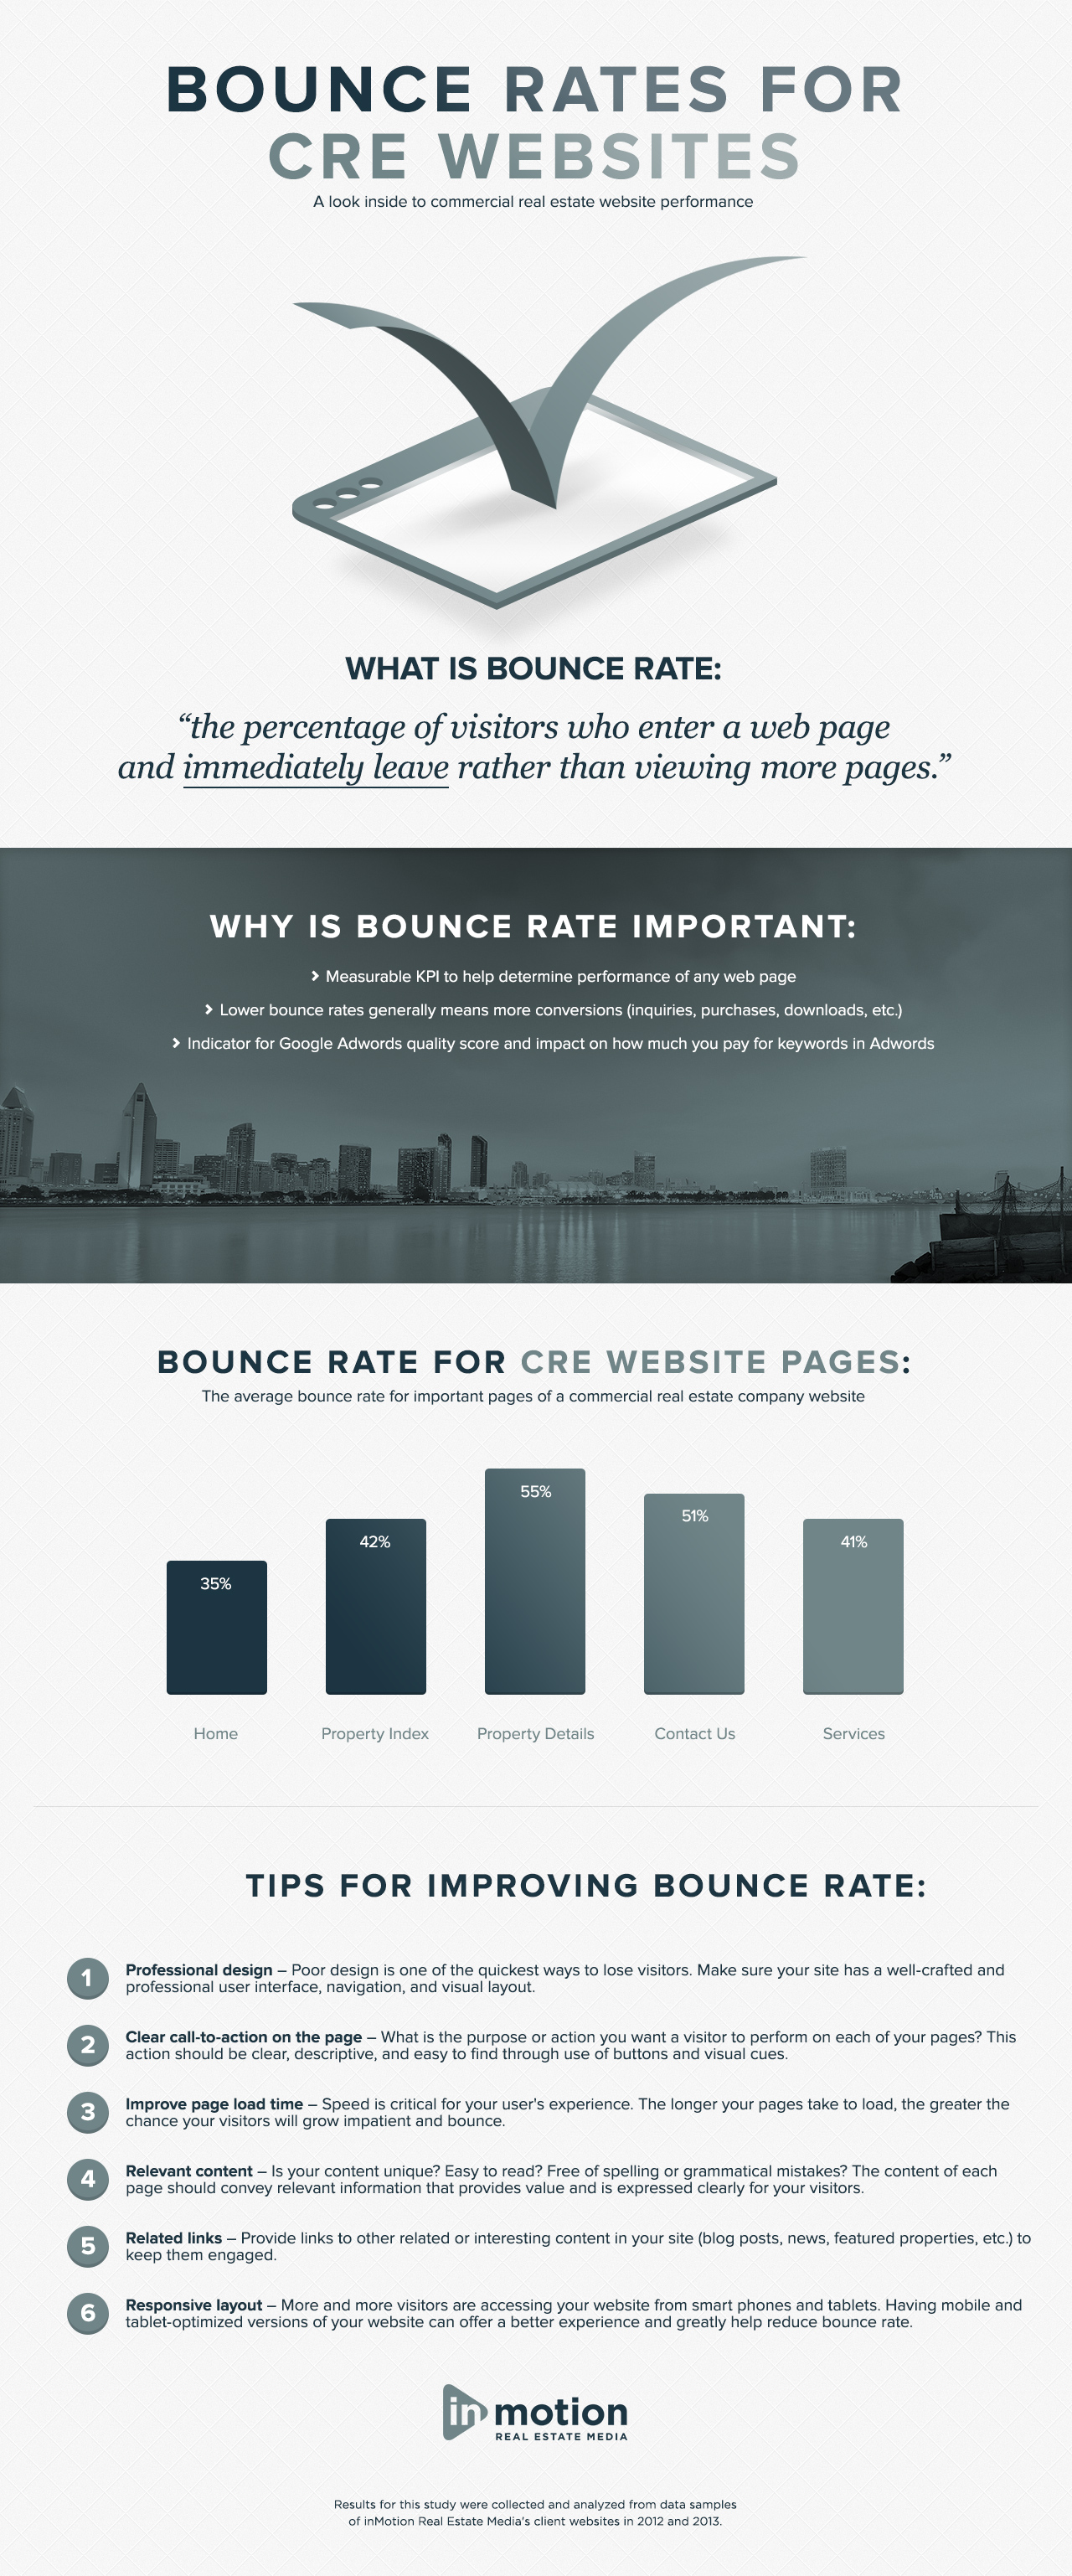 Bounce rate for real estate websites